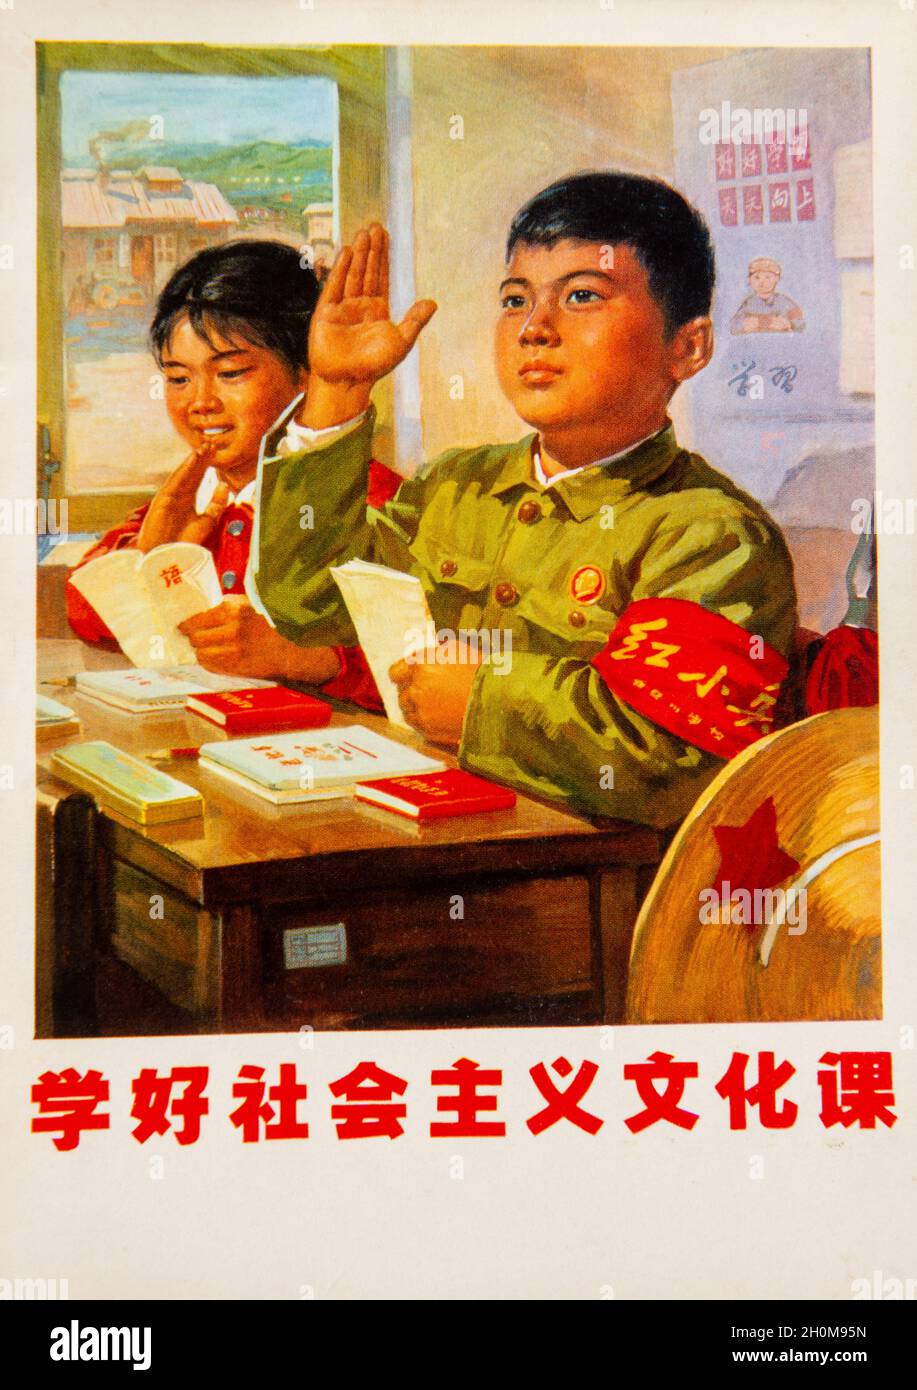 Propaganda poster of Little Red Soldier raising his hand in class during China's Culture Revolution. Stock Photo